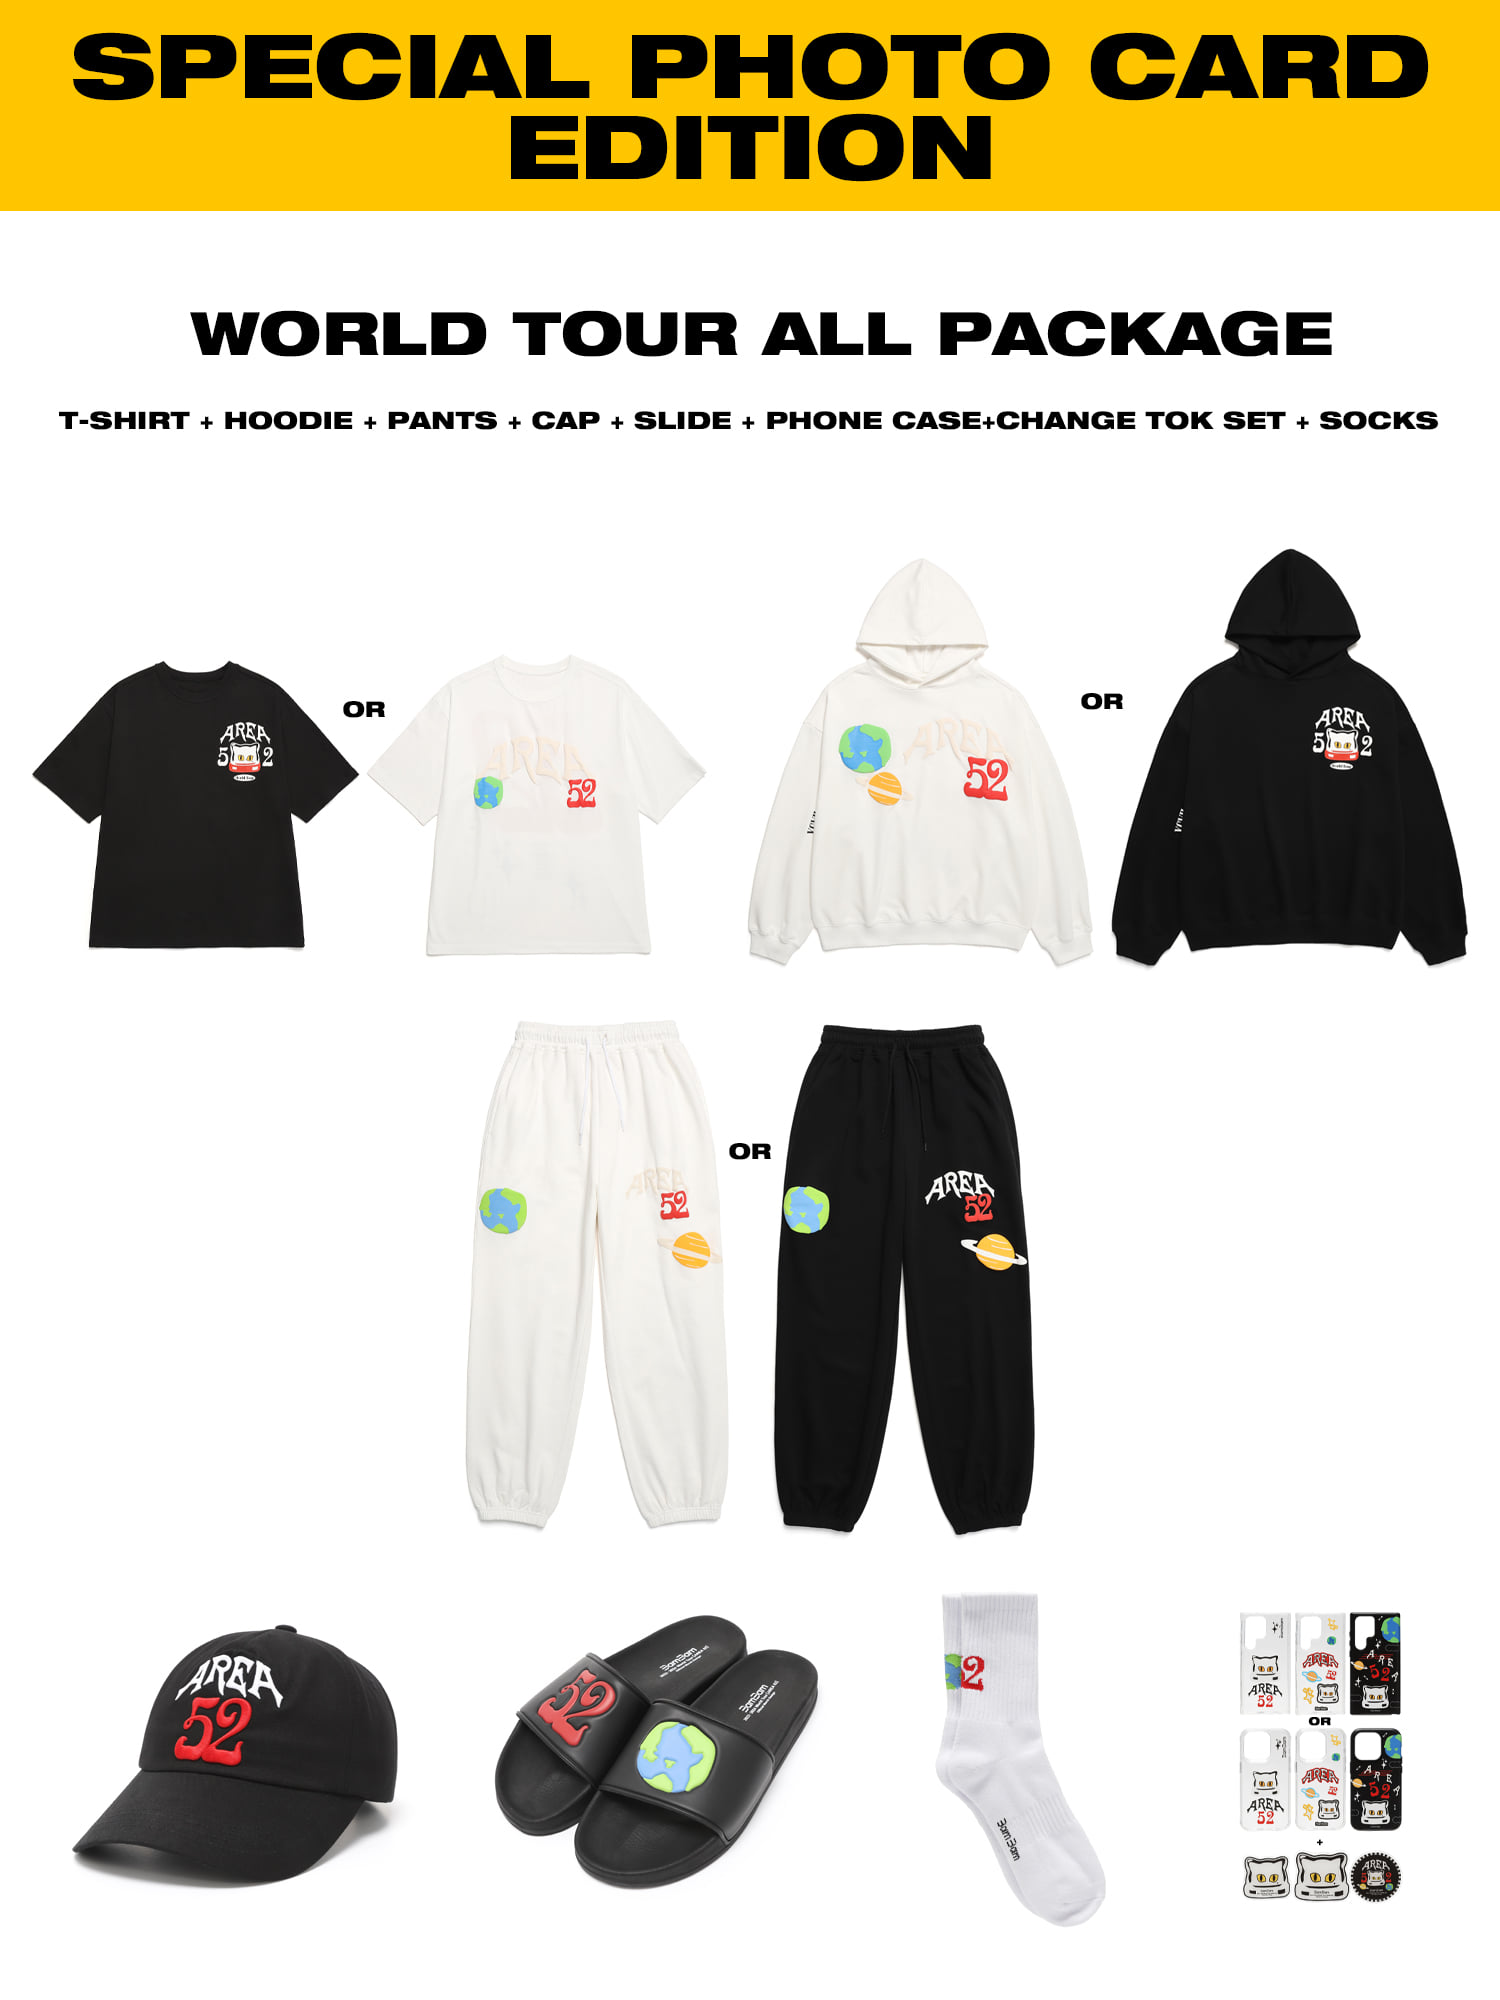 WD WORLD TOUR ALL PACKAGE